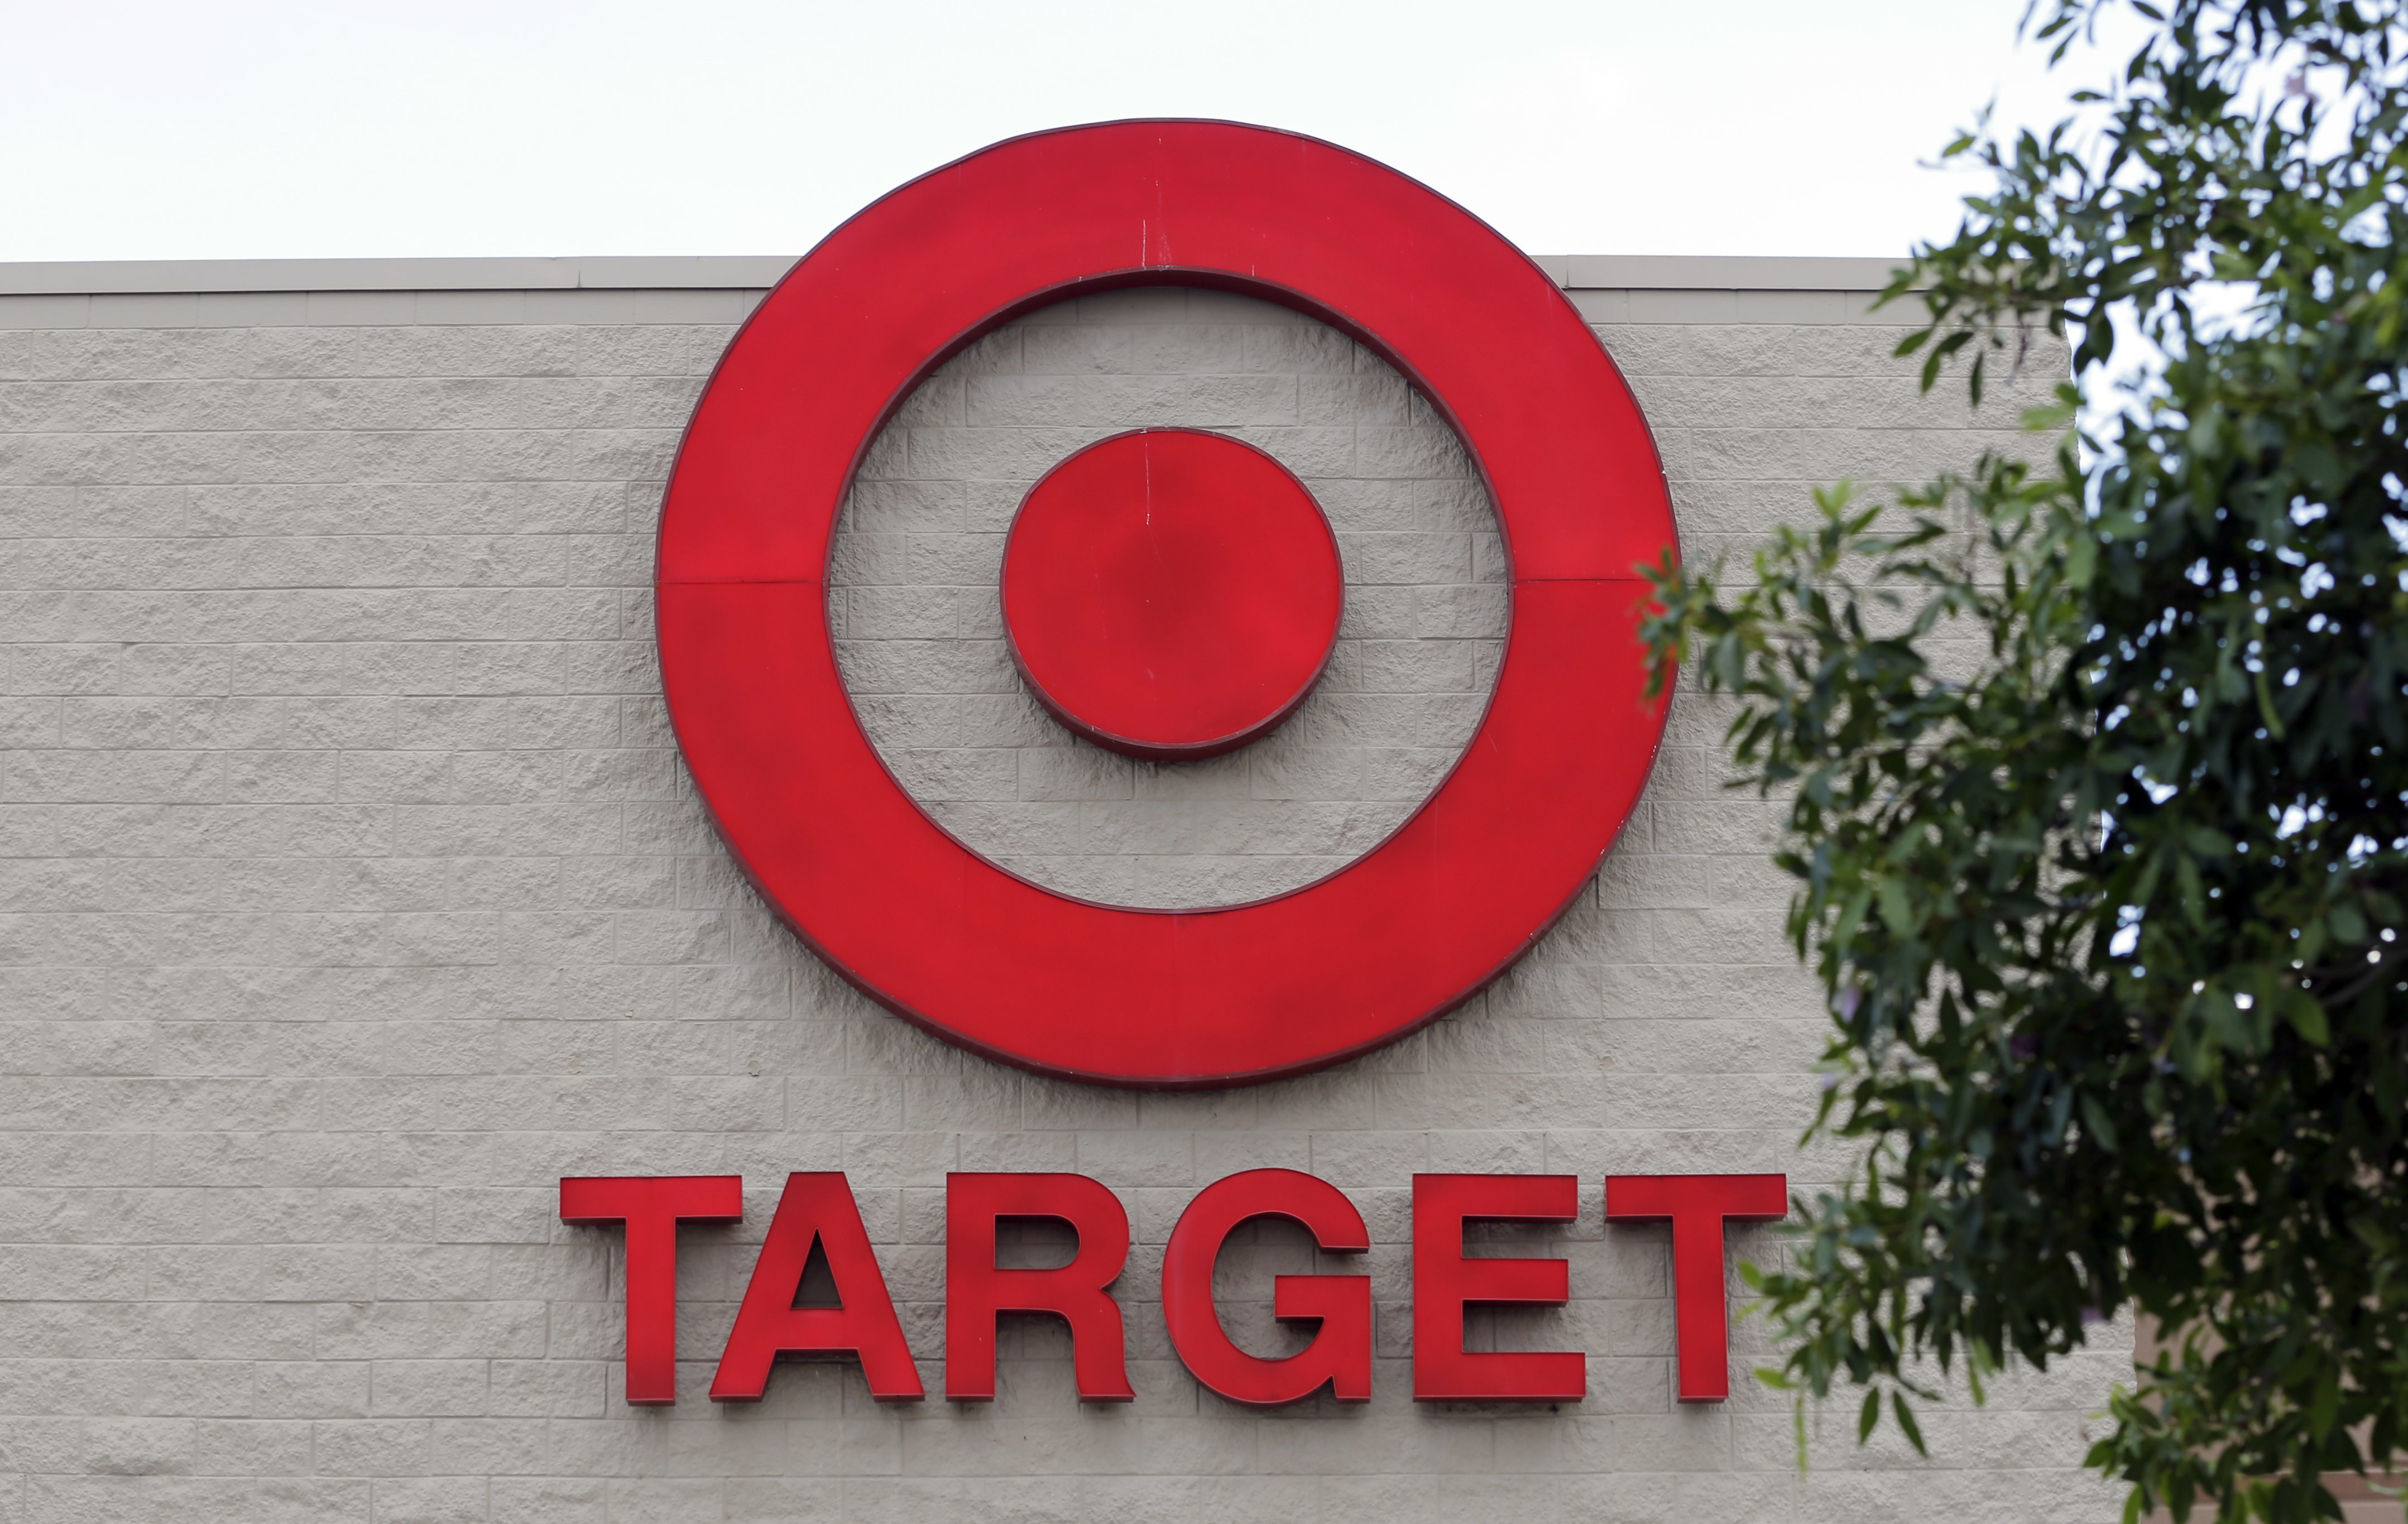 Missing the Target: stores shut, jobs lost